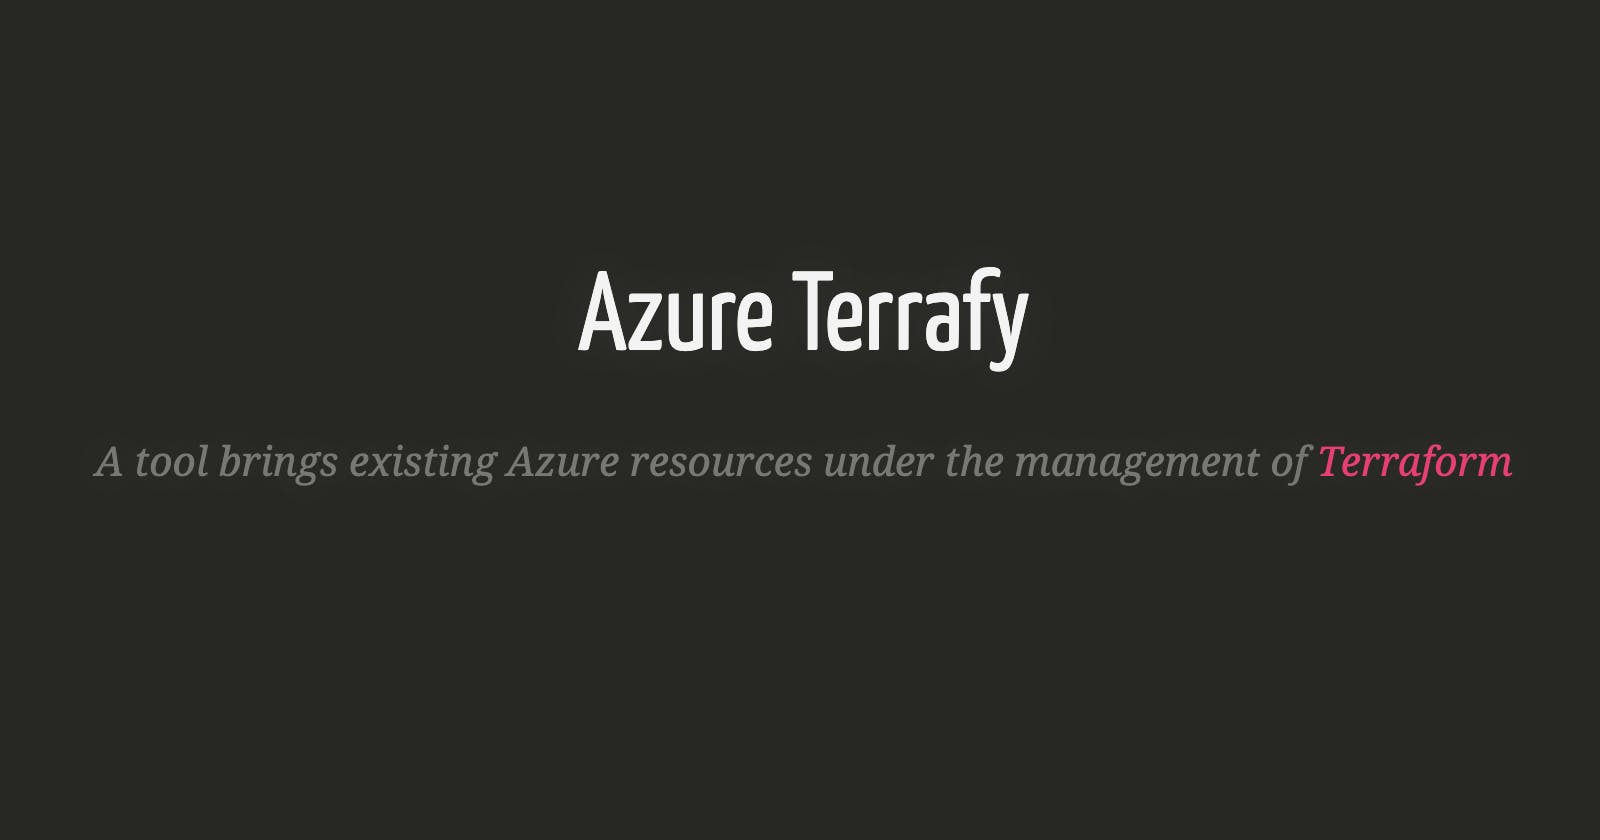 Importing your existing Azure resources under the management of Terraform using Azure Terrafy